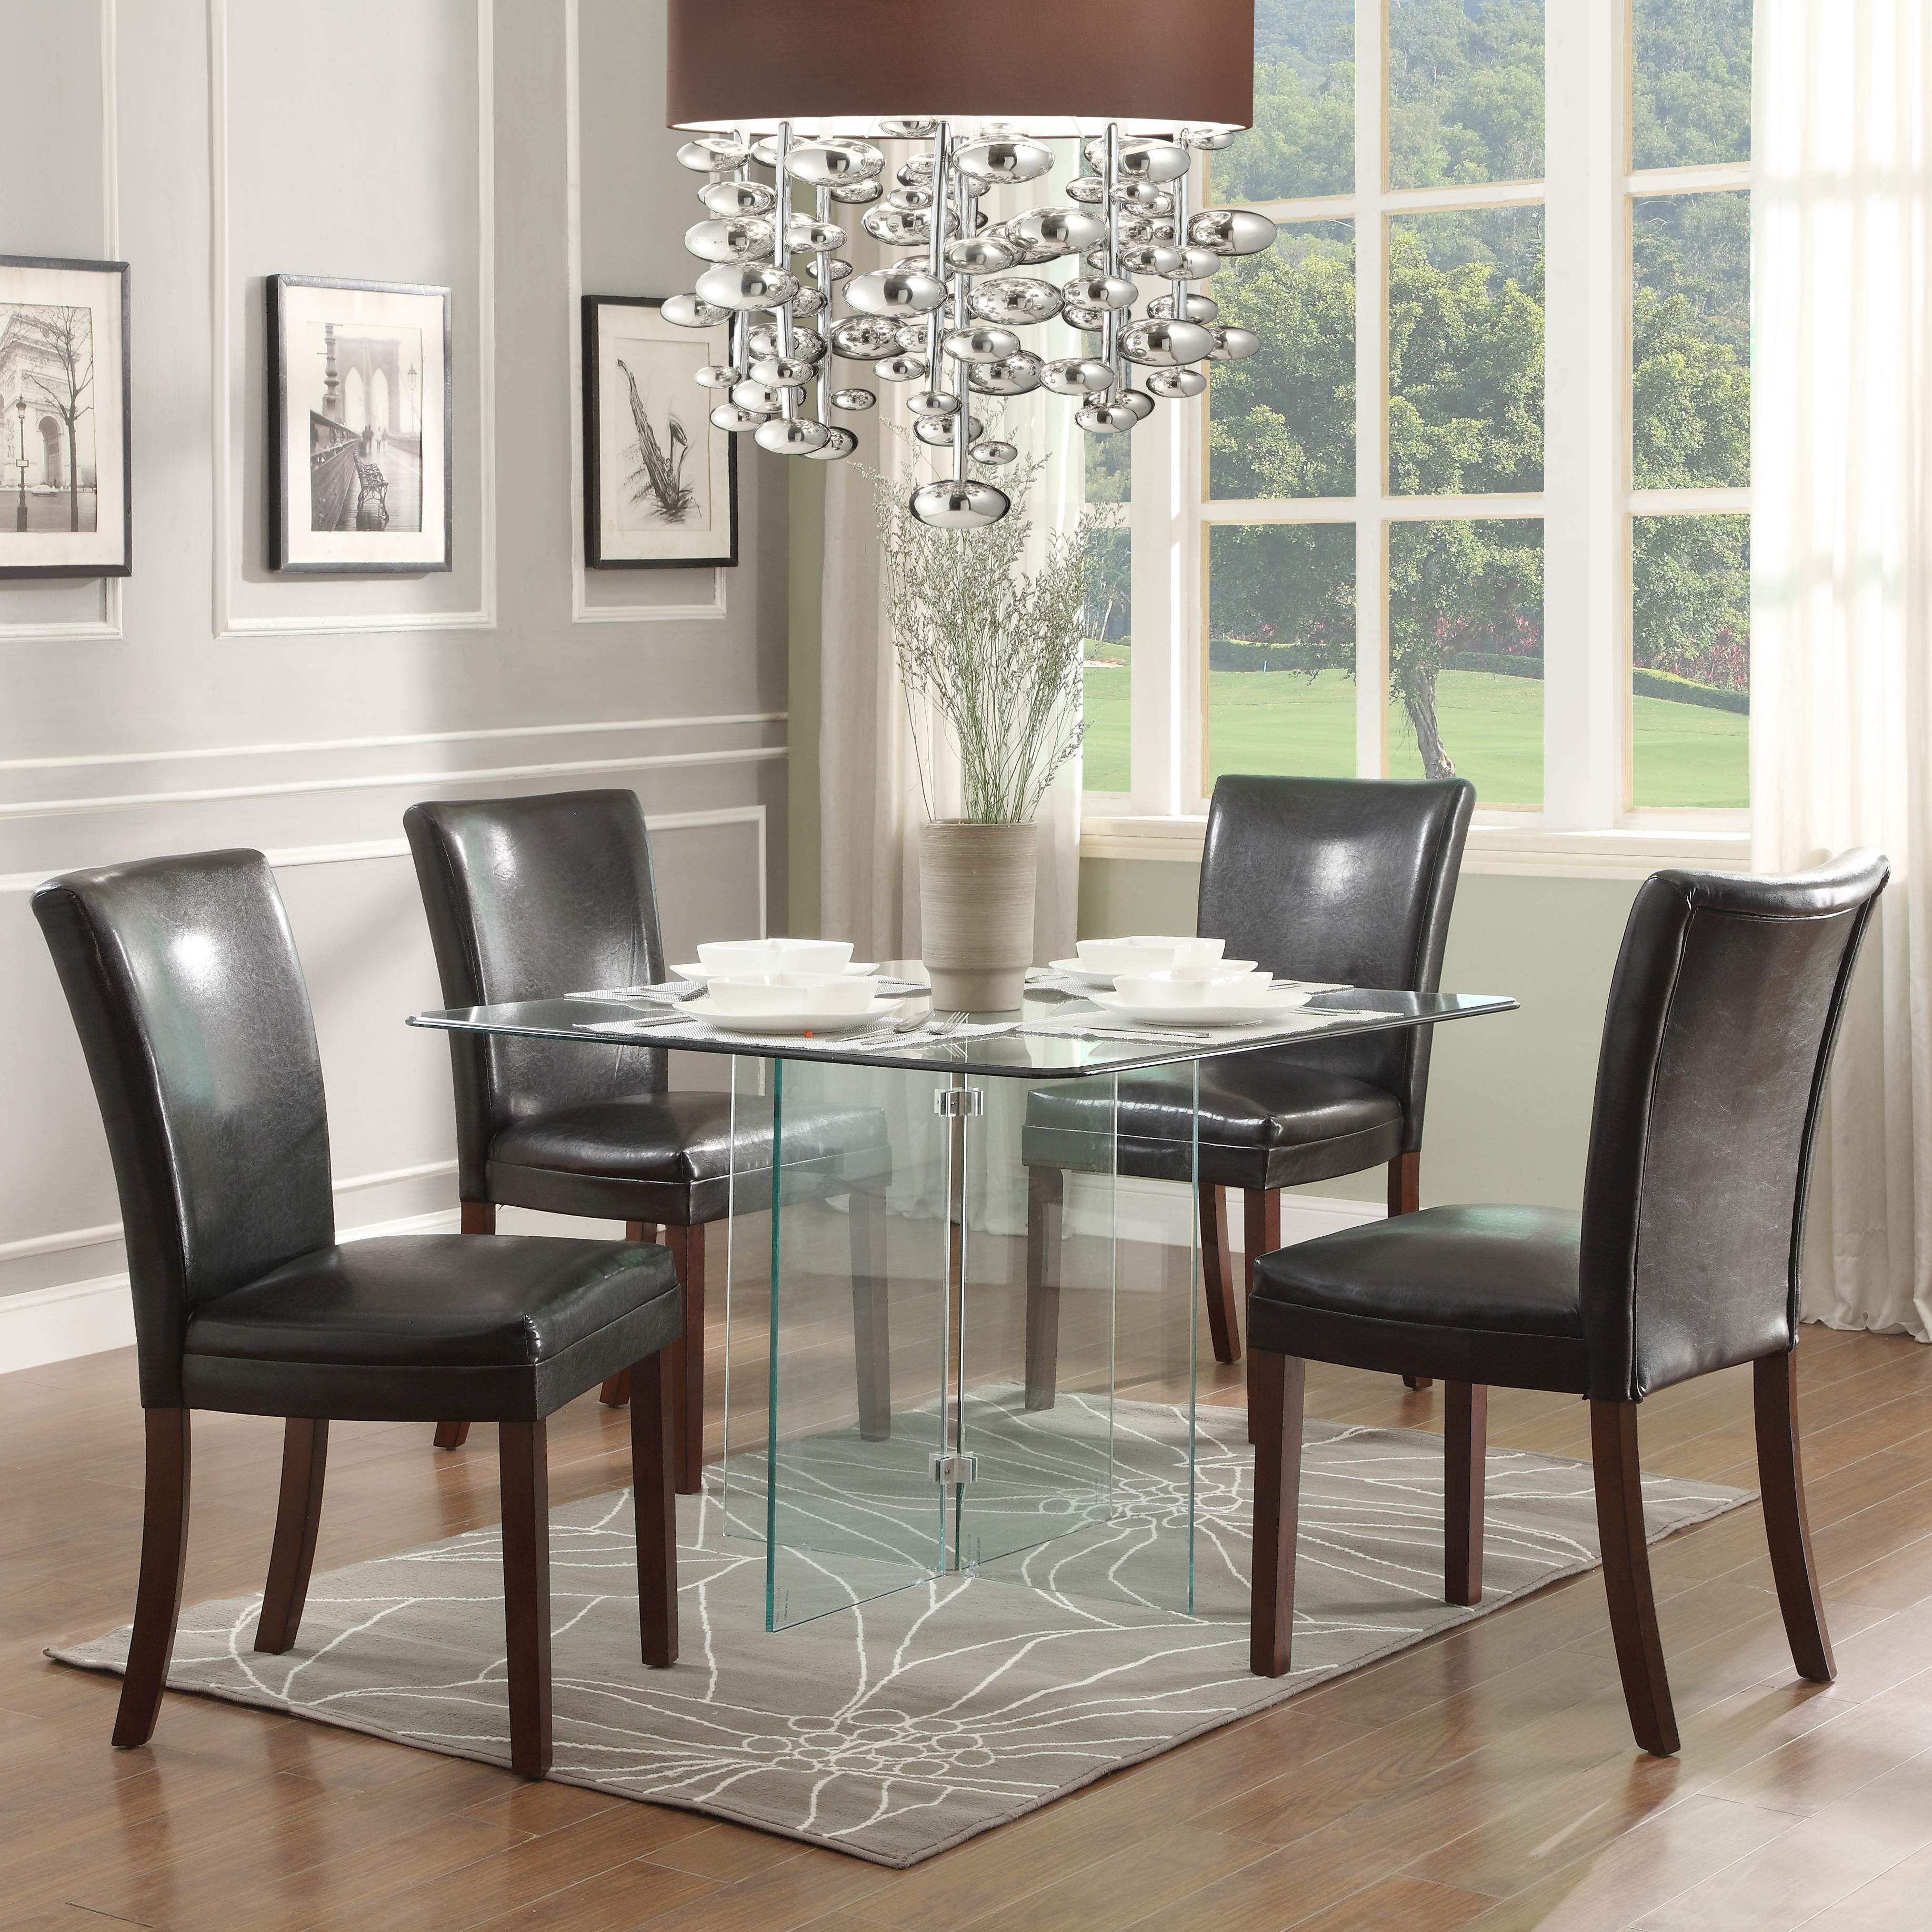 alouette square glass dining table